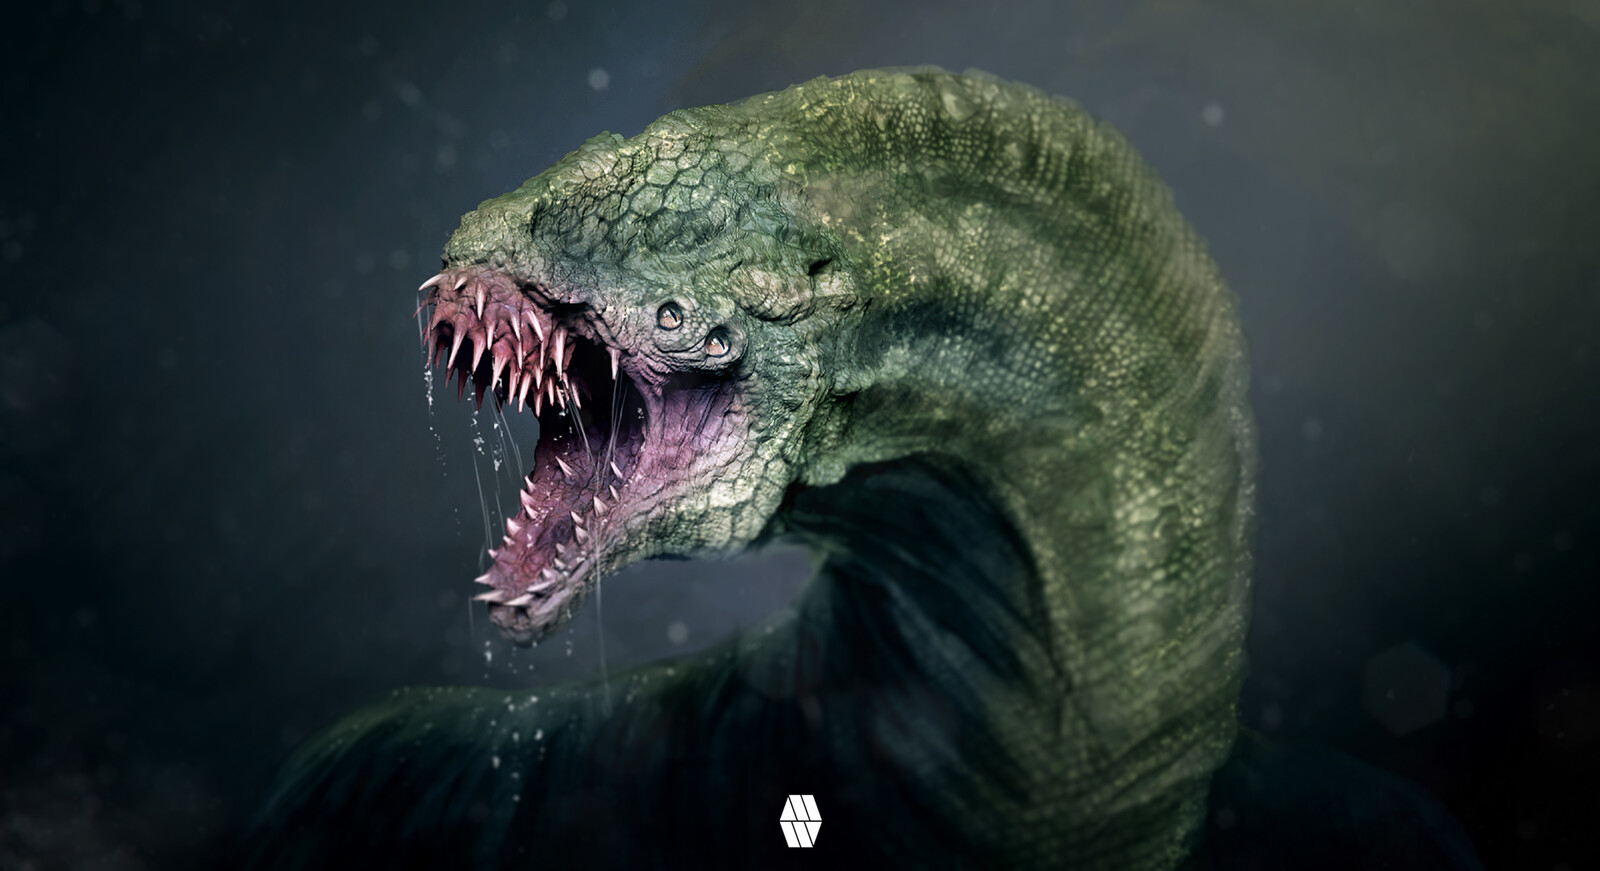 Serpent Concept - Personal Project